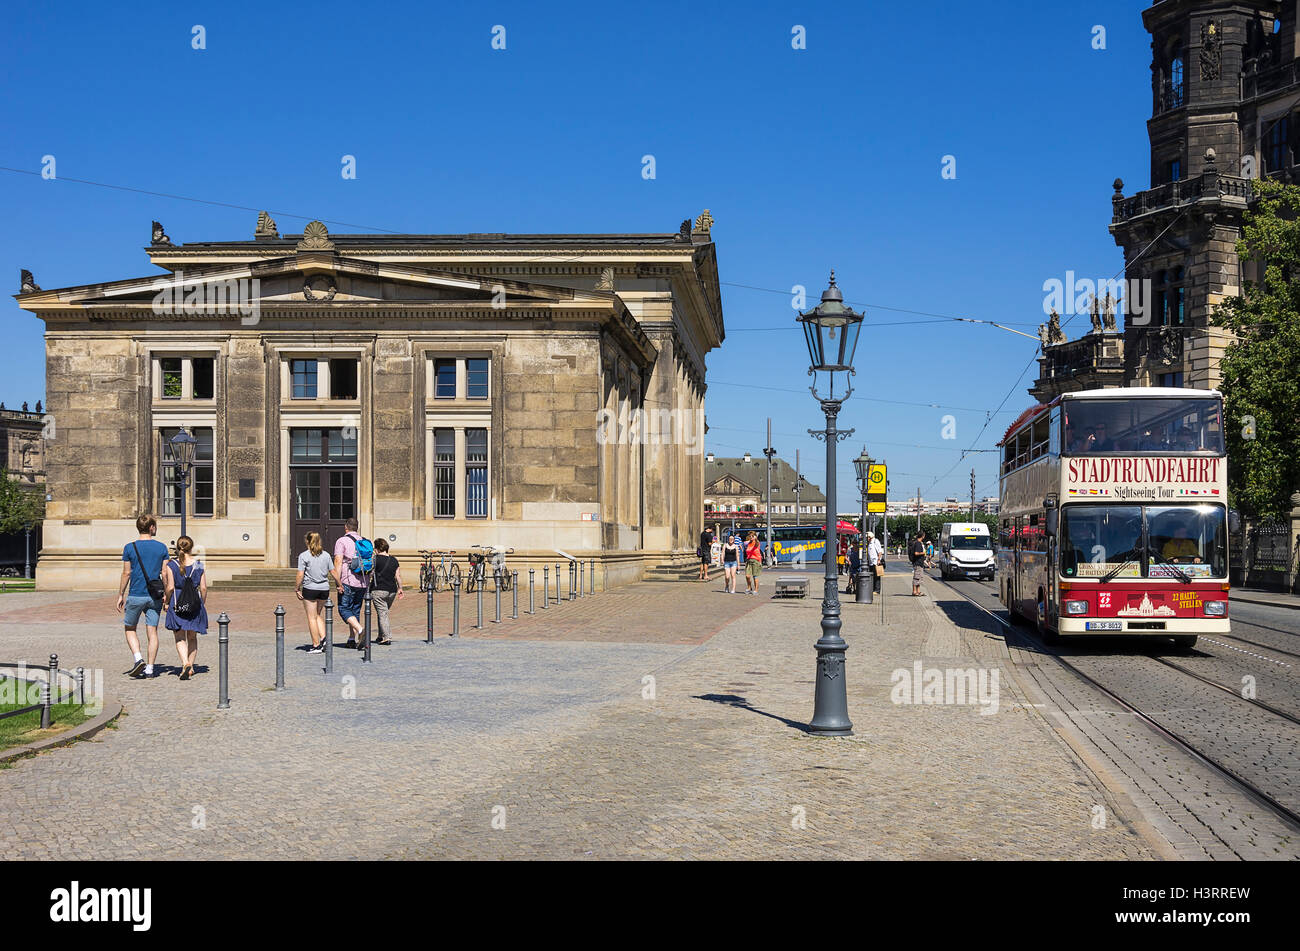 A double-decker bus for sightseeing tours approaches in the city of Dresden, Saxony, Germany. Stock Photo